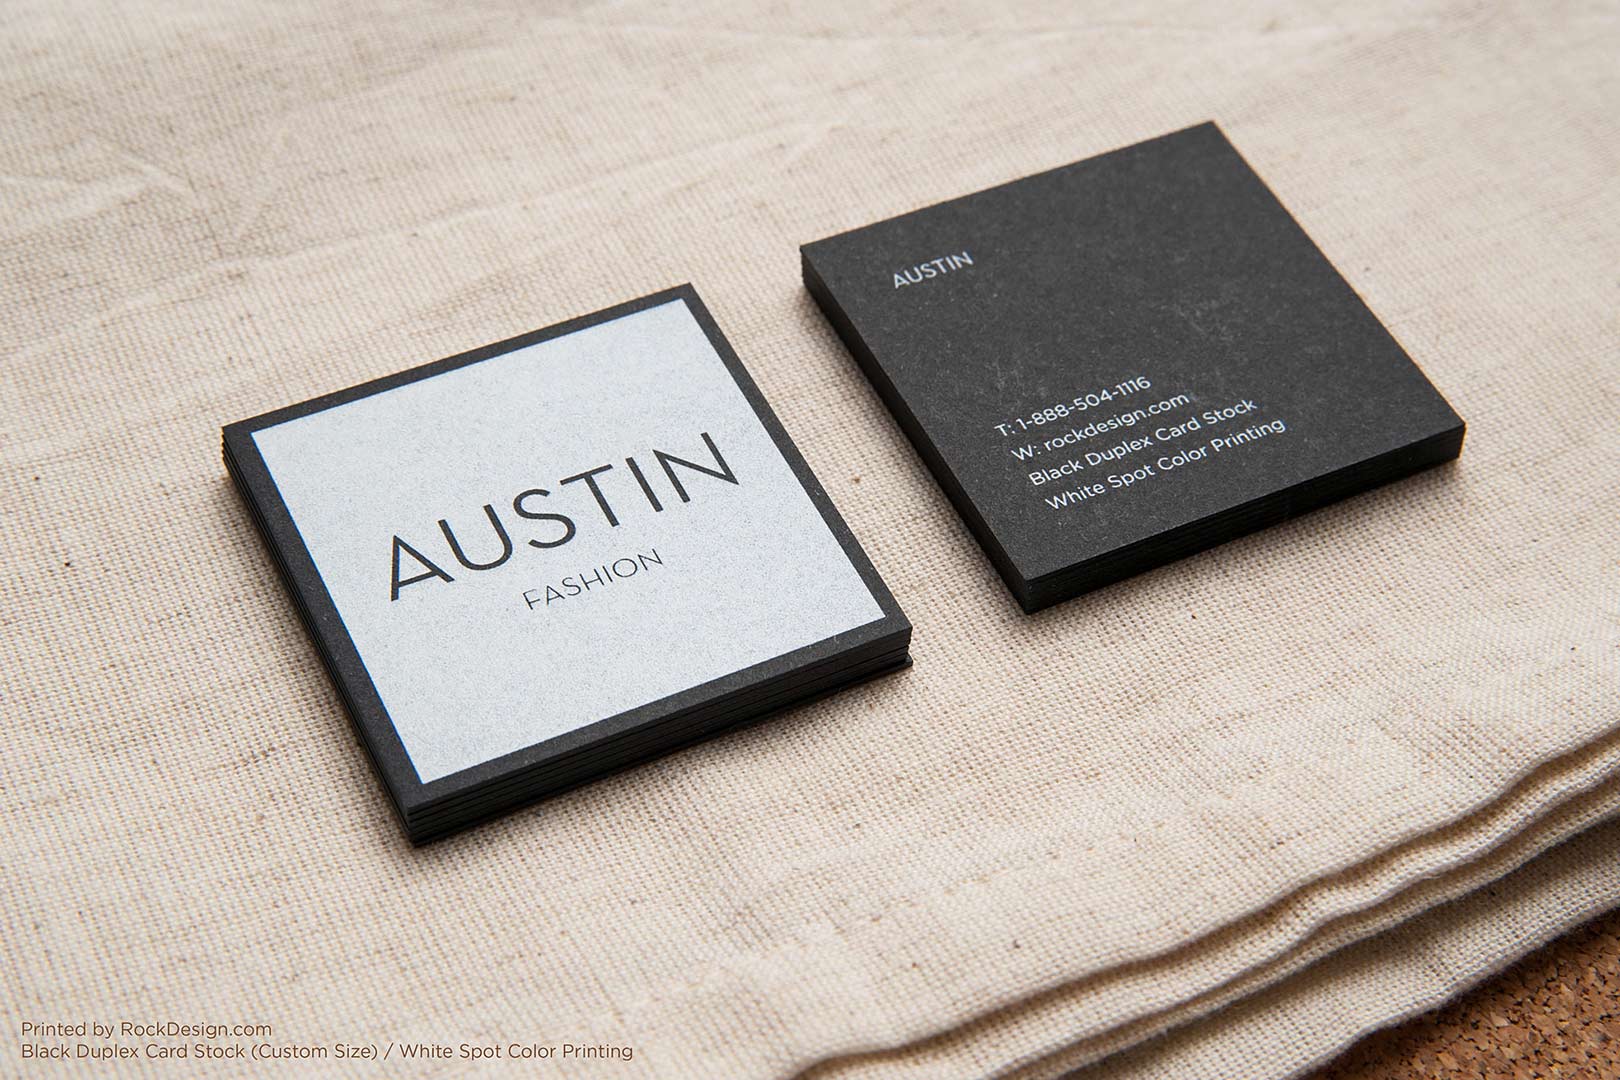 Square Business Card / Print Square Business Cards That Stand Out